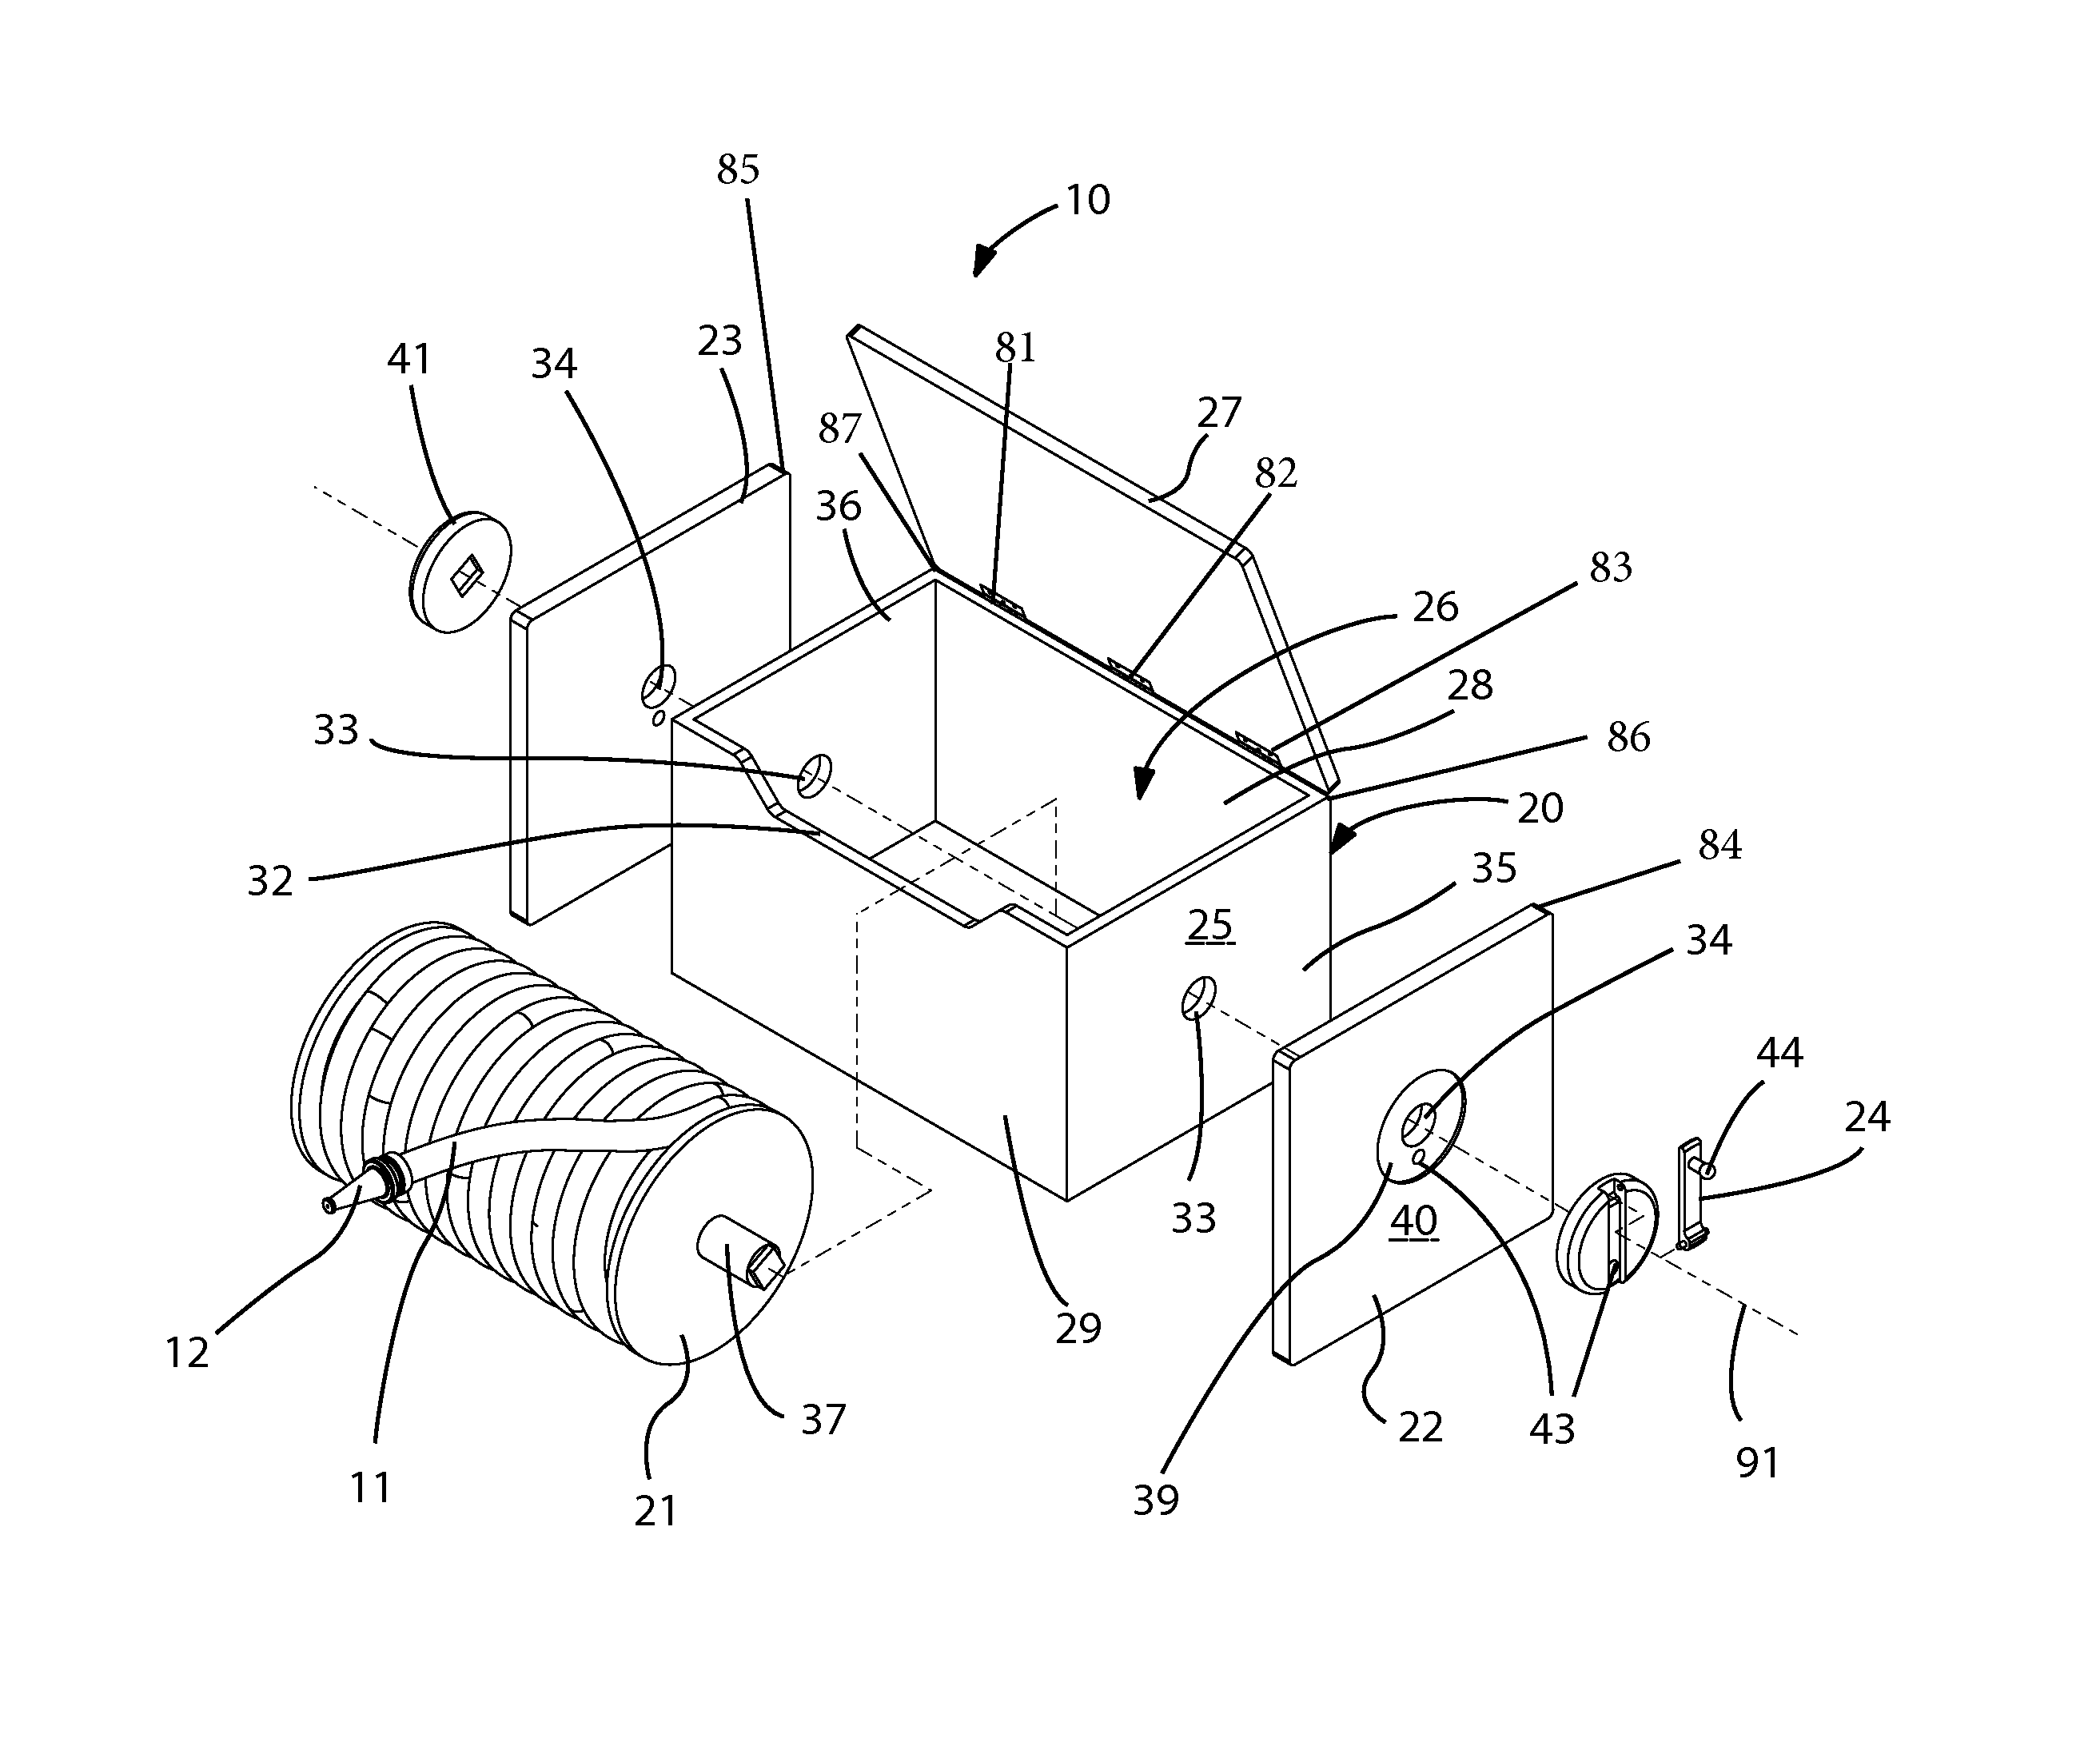 Indoor fire hydrant and associated method